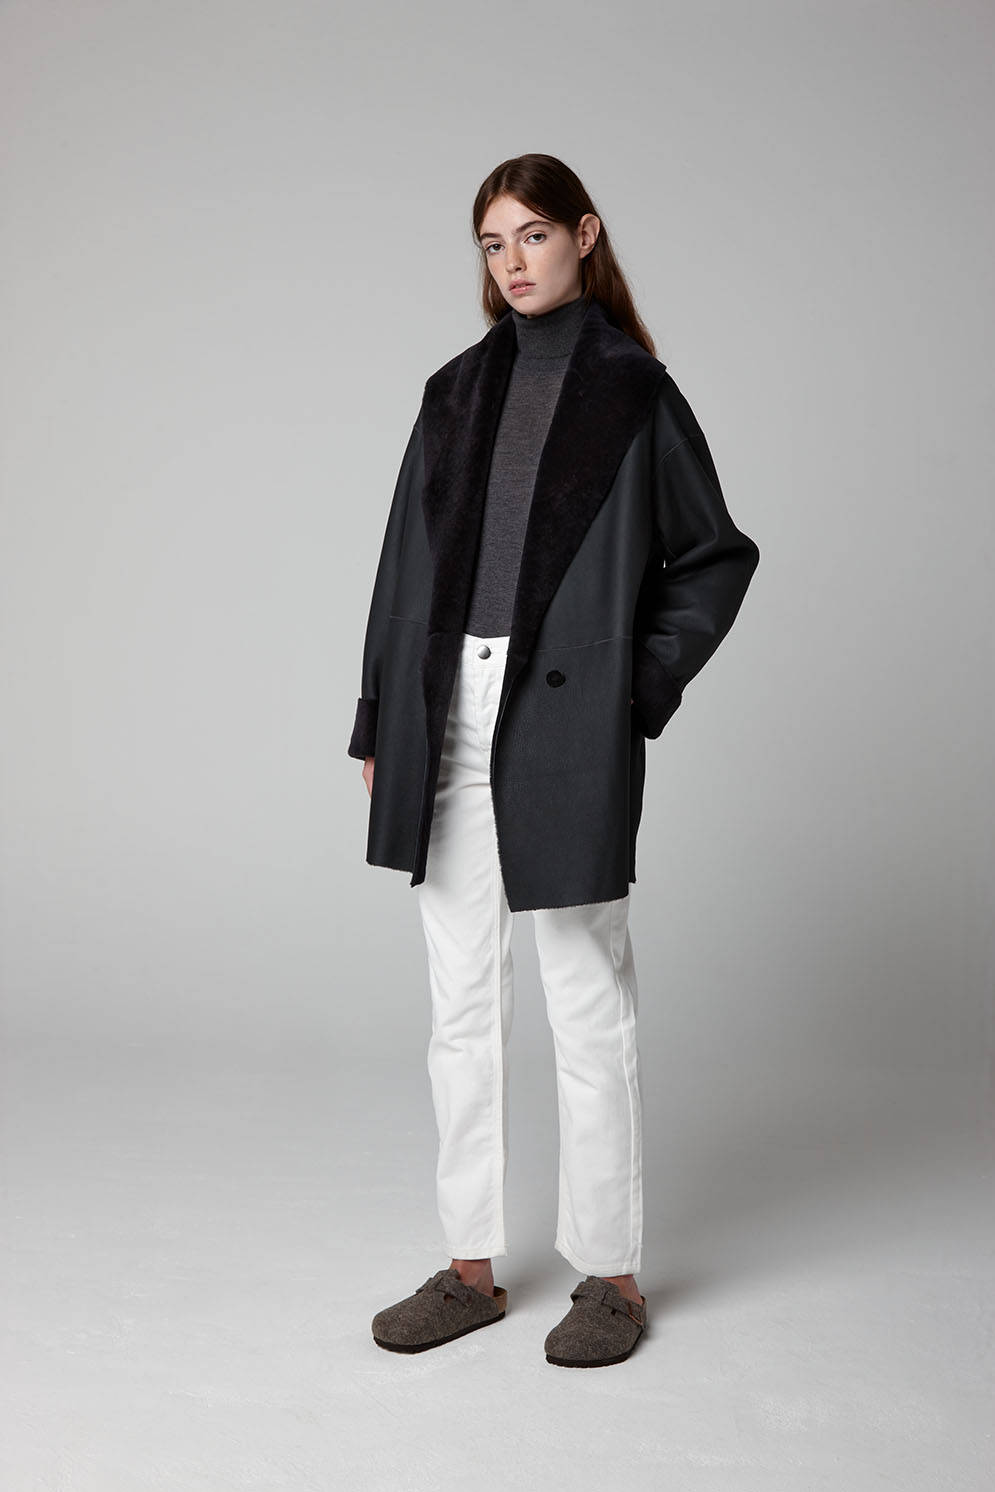 Gushlow & Cole | British Luxury Shearling & Leather